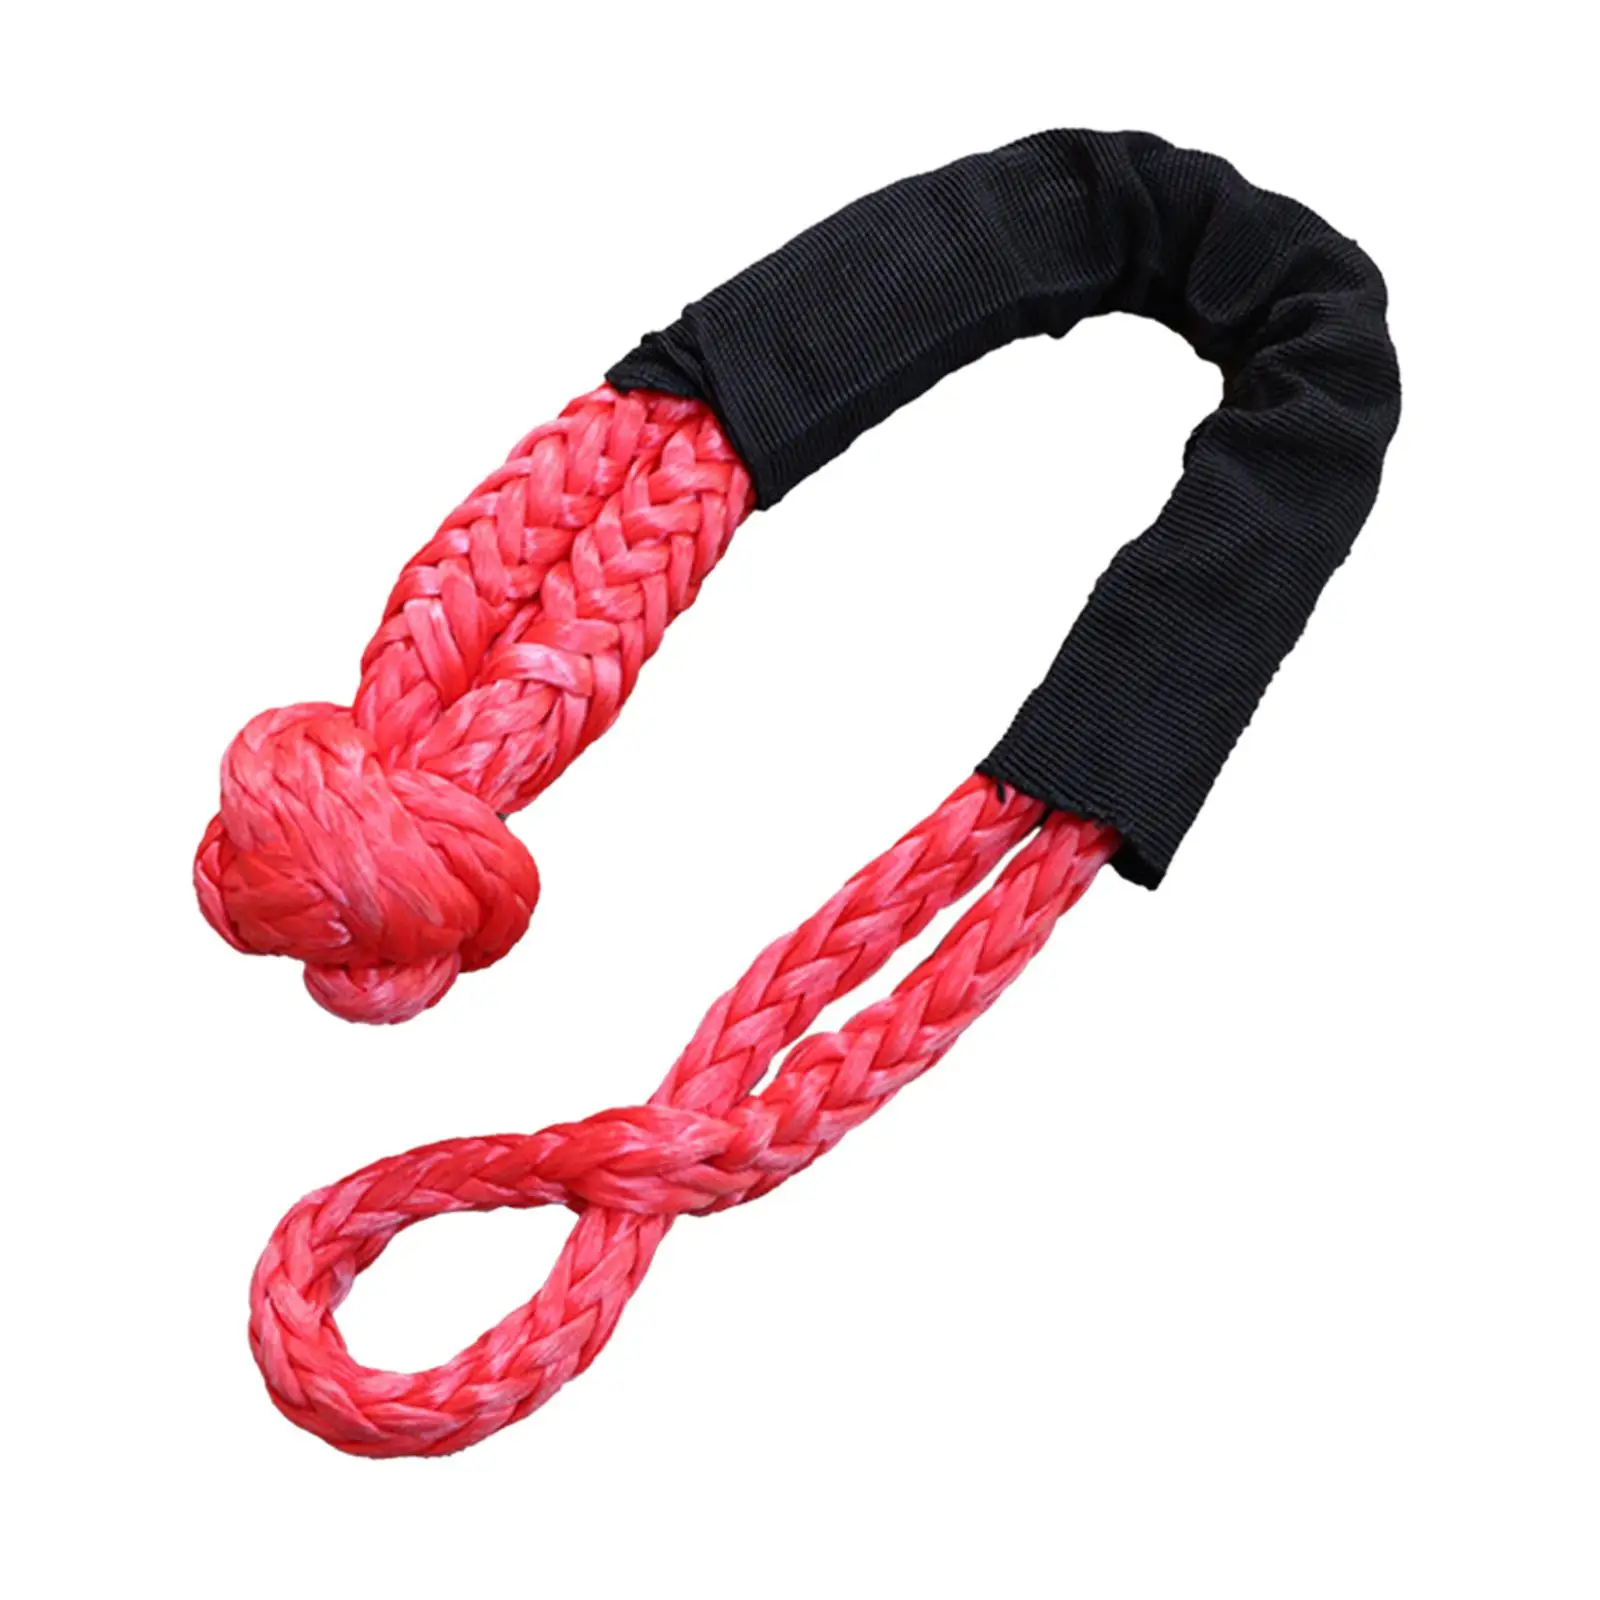 Soft Shackle Car Breakdowns Protective Sleeve High Strength Strong Tow Rope for Winches SUV Vehicles trucks Towing